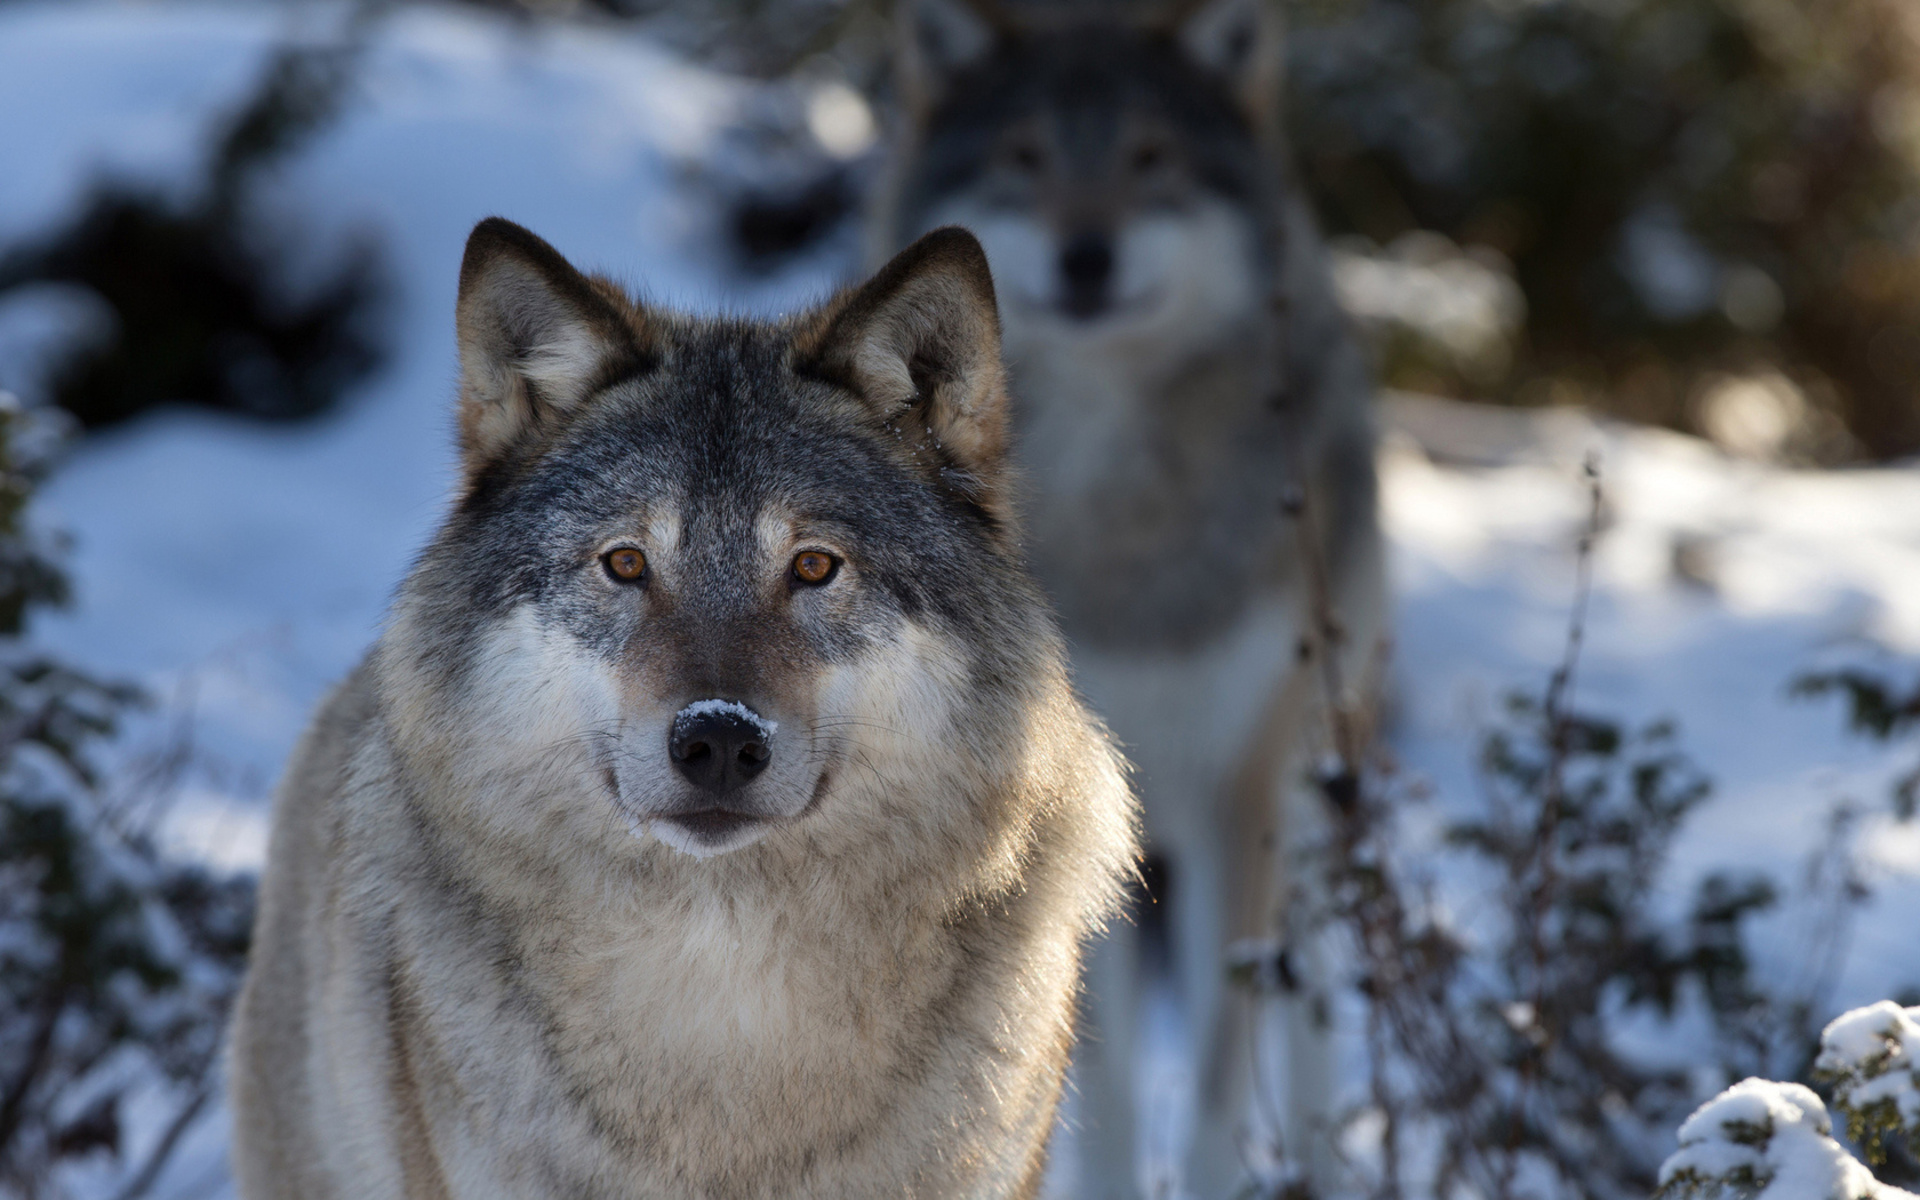 wolves, Wolf, Animals, Dogs, Nature, Wildlife, Predator, Fur, Whiskers